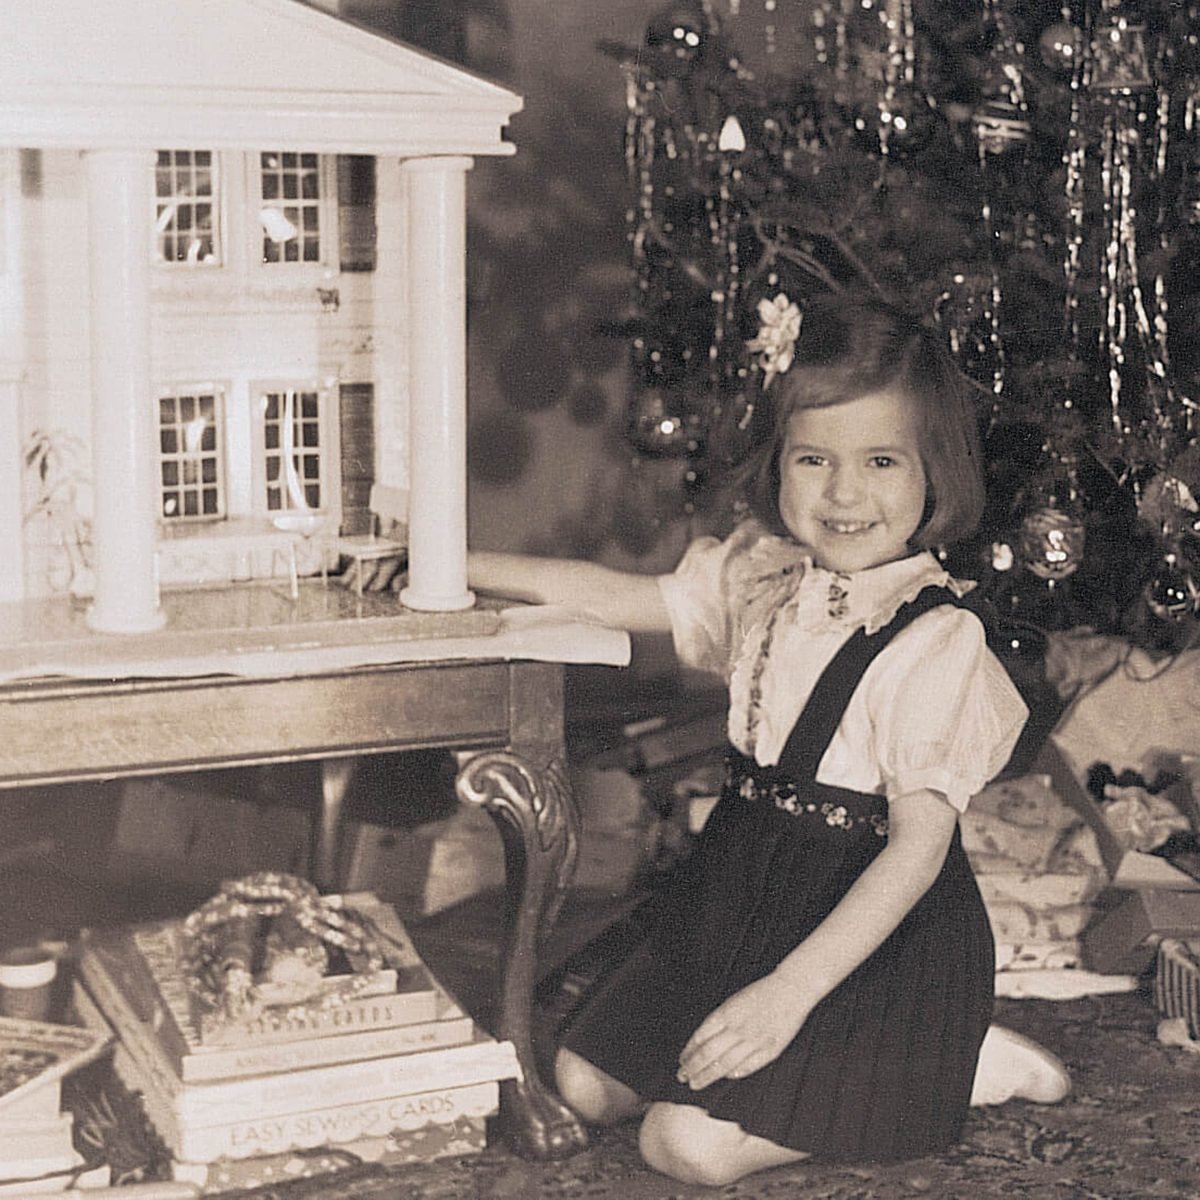 Vintage Christmas Pictures Through the Years (1940s - 1990s)